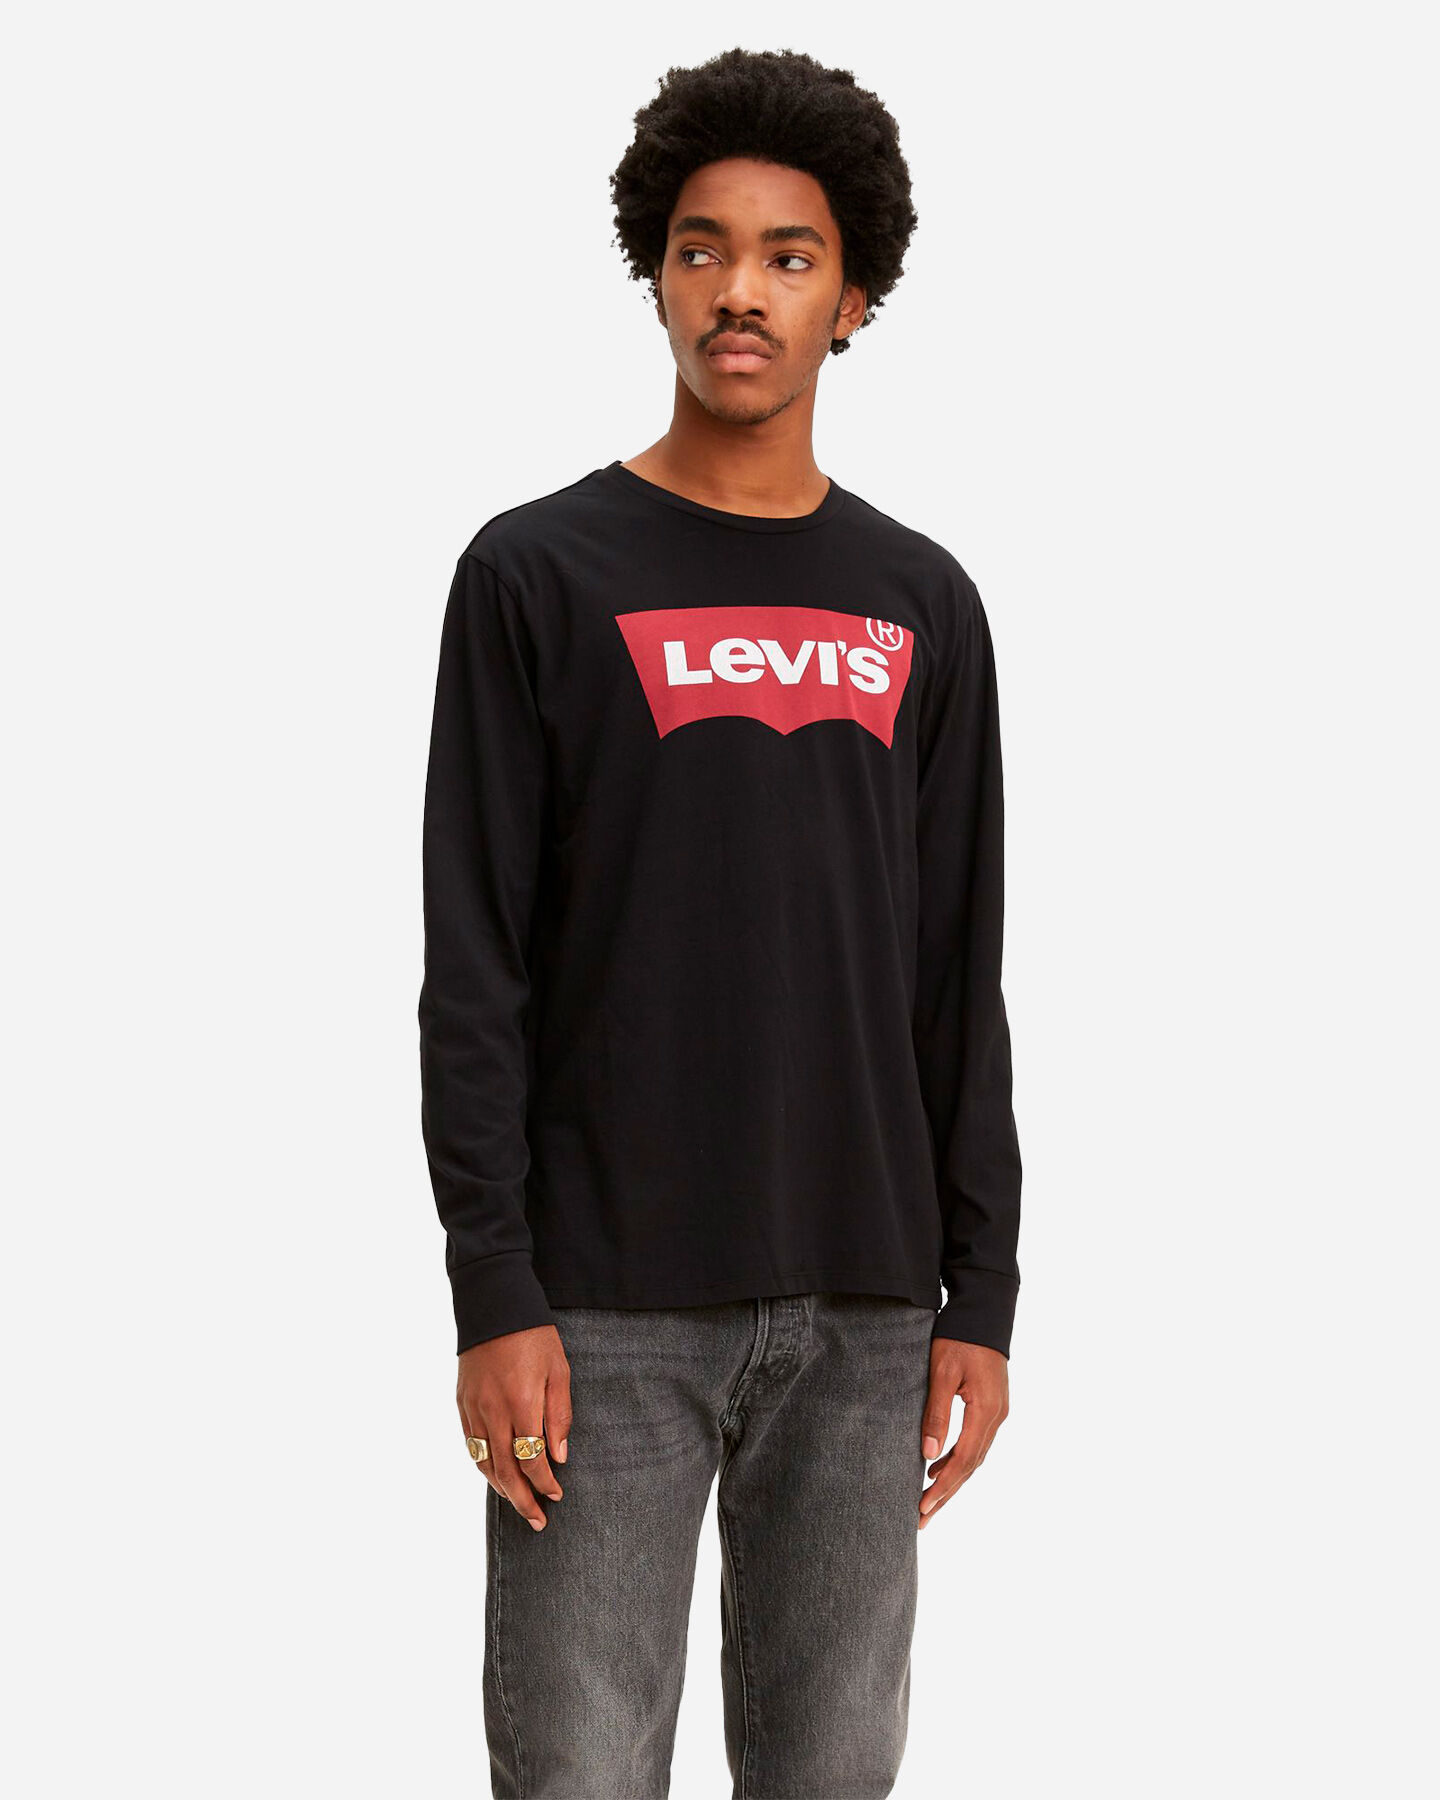  T-Shirt LEVI'S BATWING M S4113276|0013|XS scatto 1